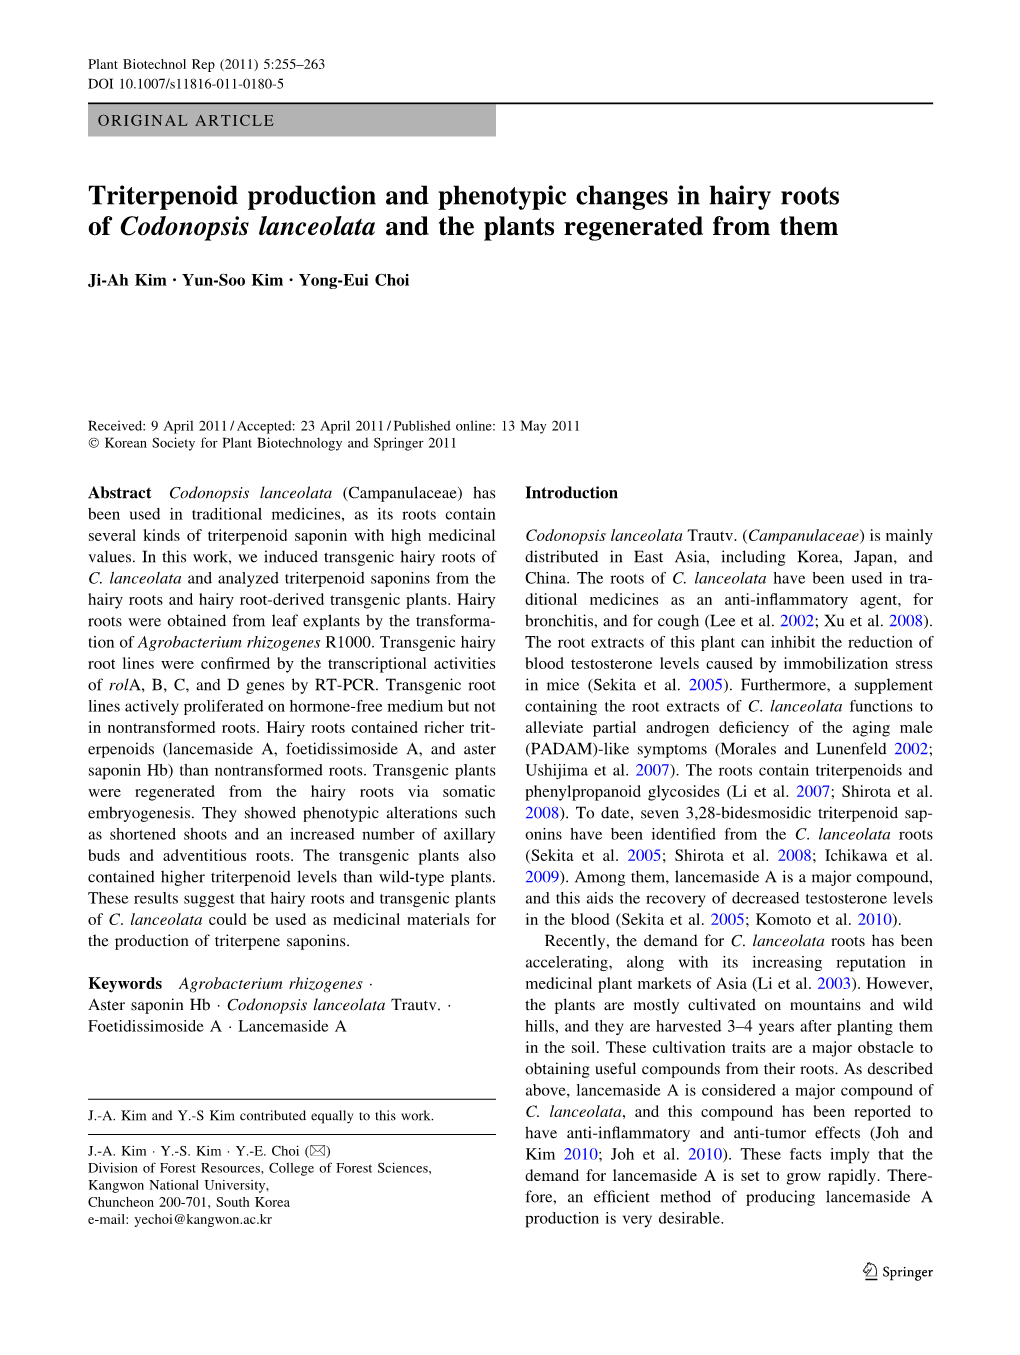 Triterpenoid Production and Phenotypic Changes in Hairy Roots of Codonopsis Lanceolata and the Plants Regenerated from Them